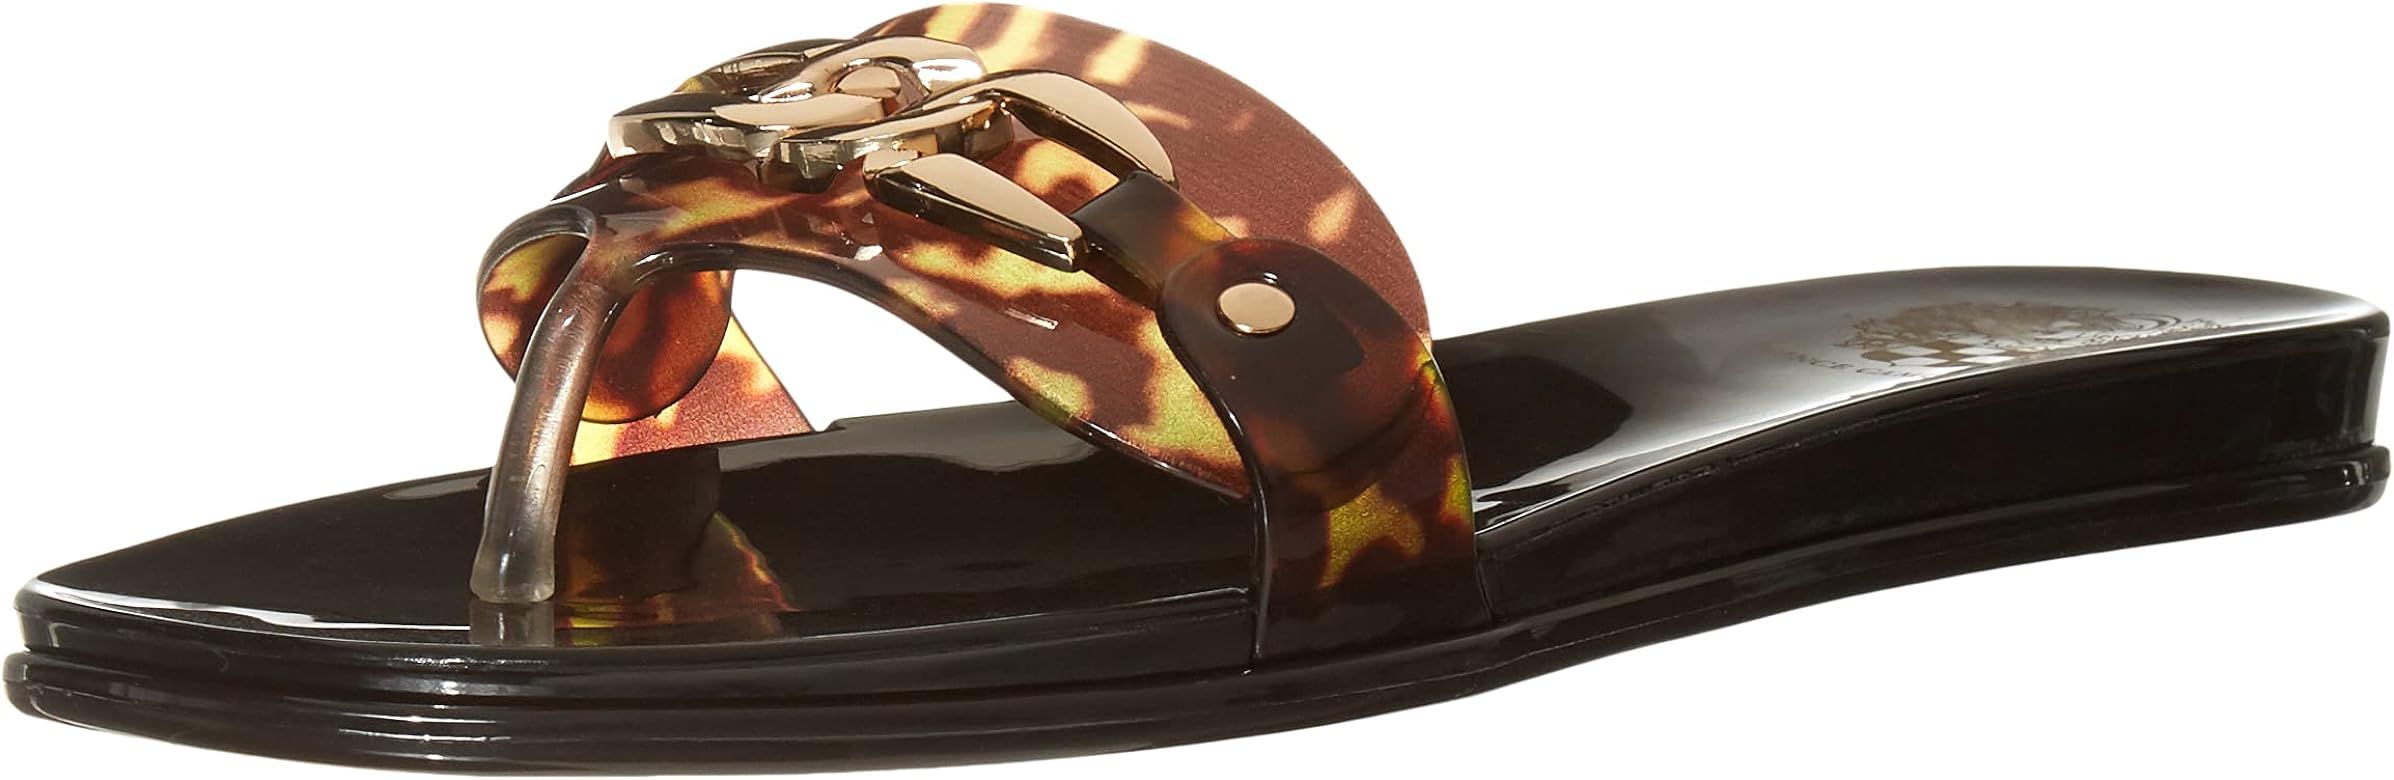 Vince Camuto Women's Evolet Jelly Thong Flip-Flop | Amazon (US)